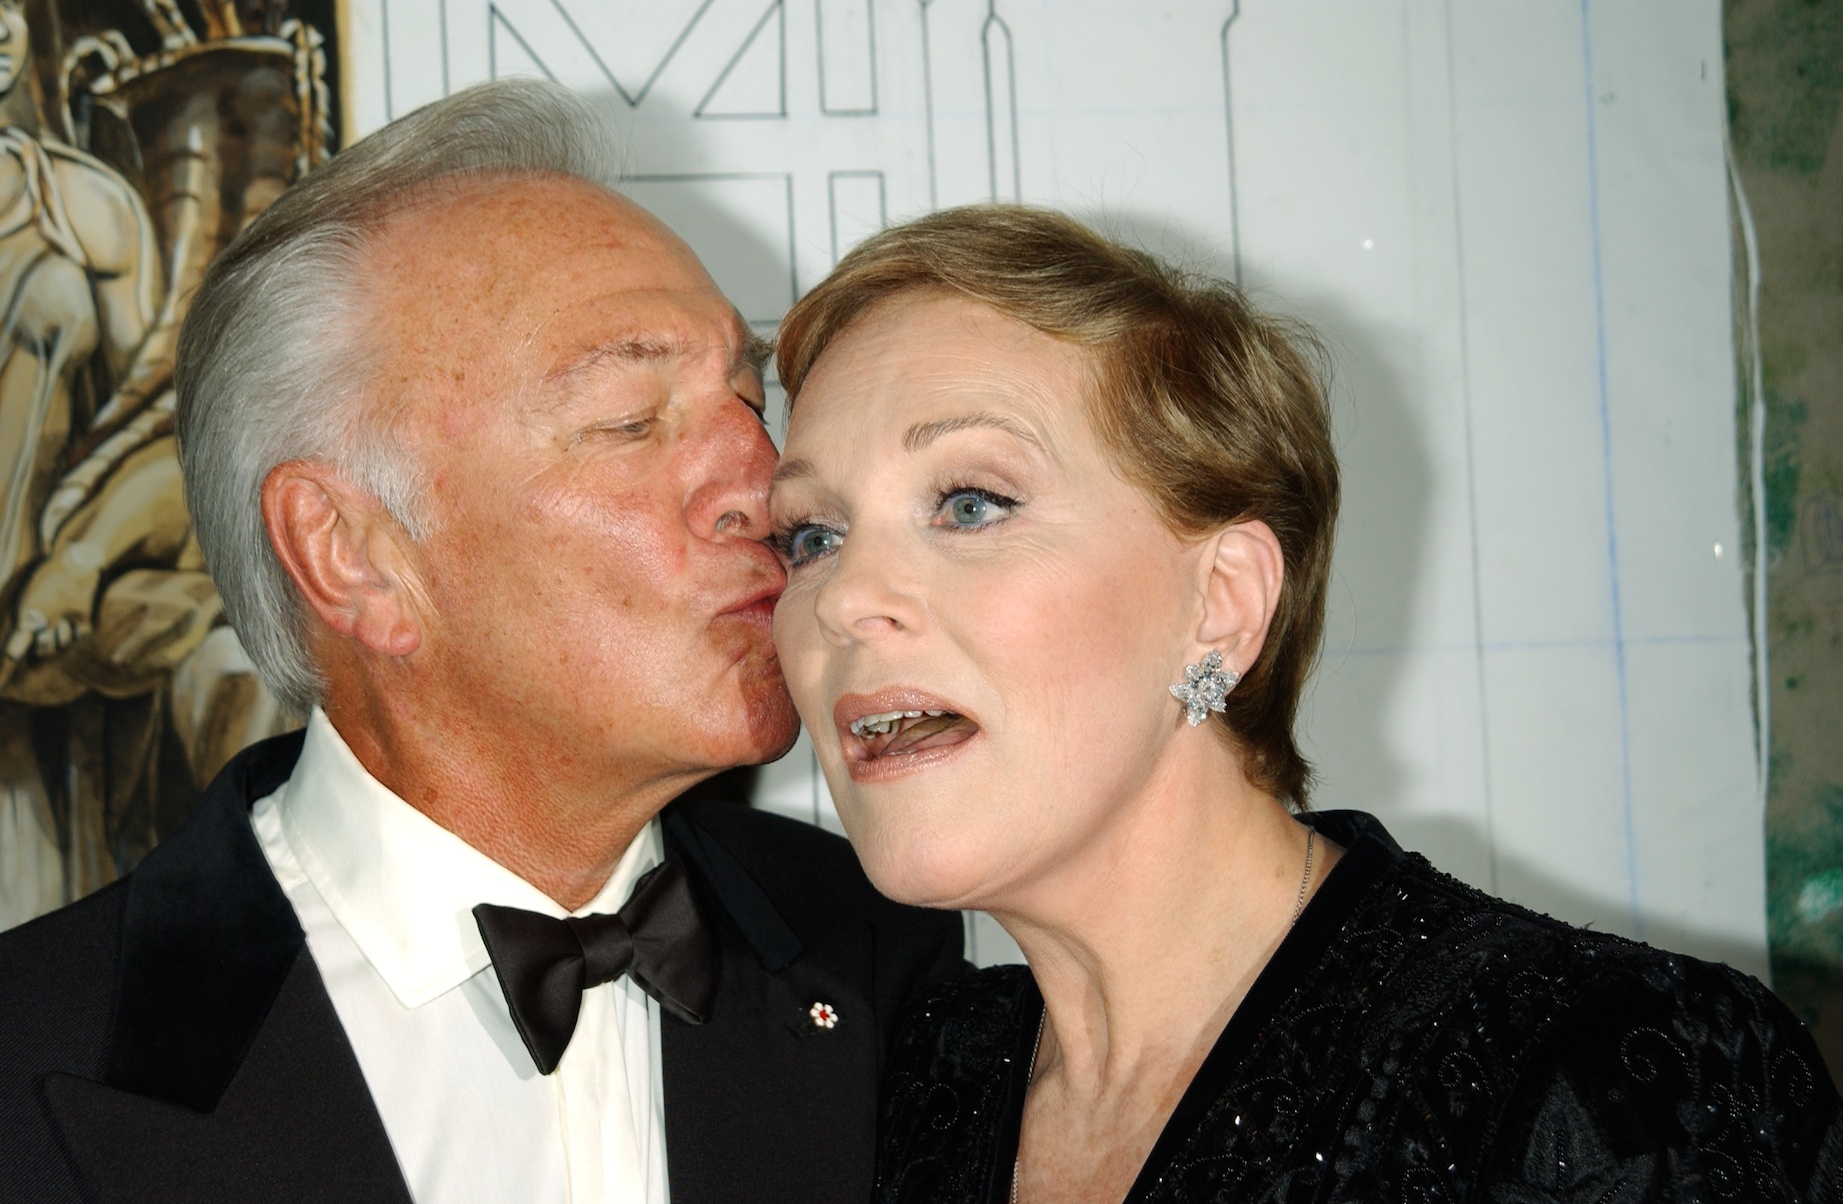 Christopher Plummer and Julie Andrews, who co-starred in the Oscar-winning movie 'The Sound of Music'